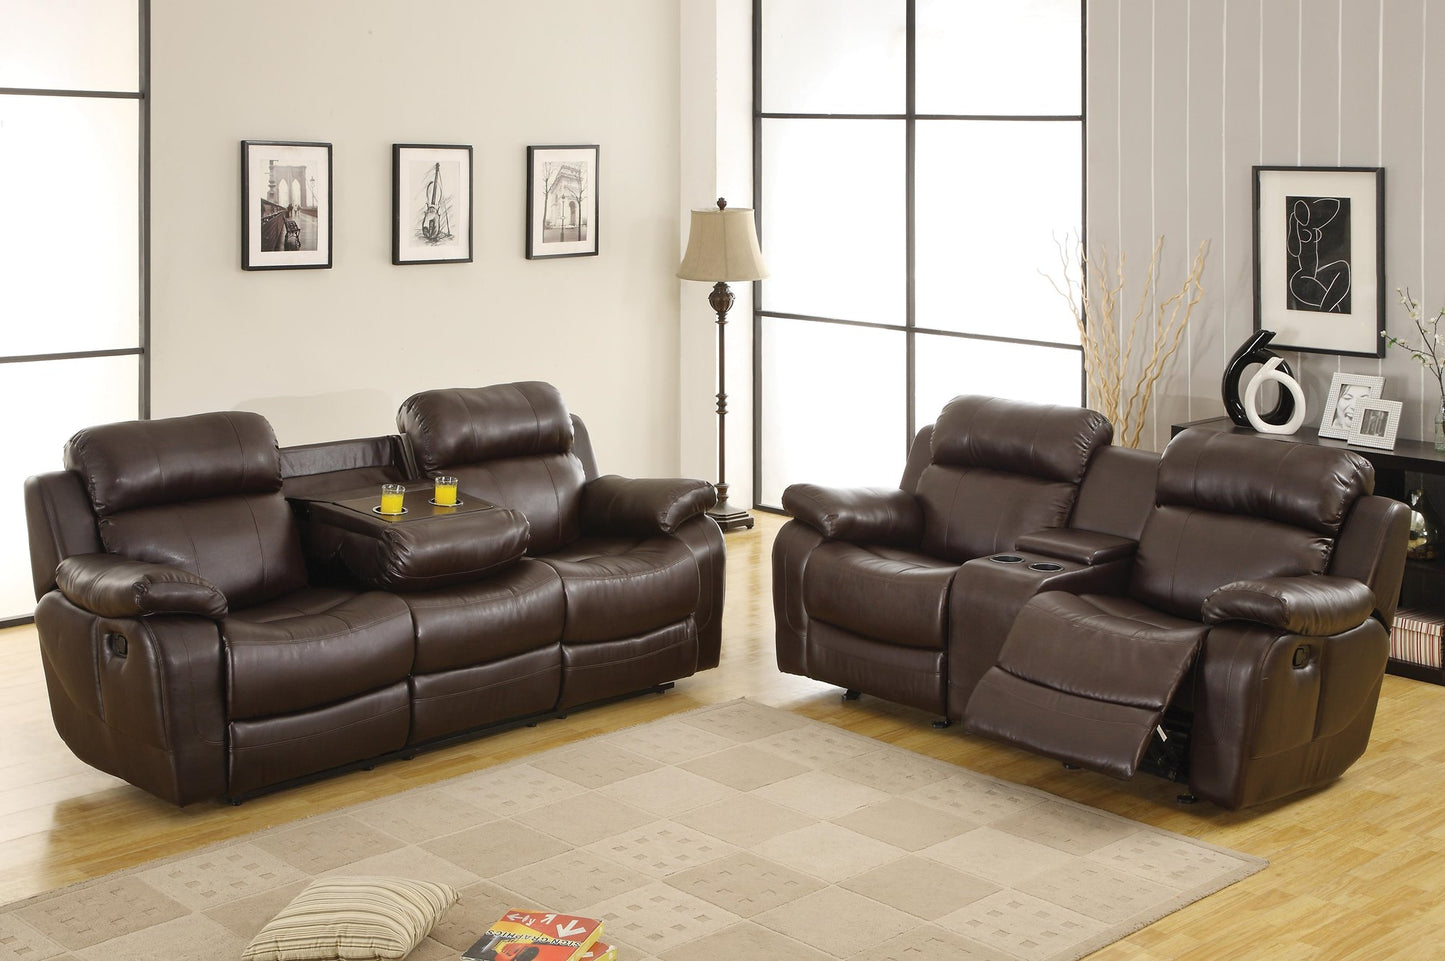 Homelegance MarilleDouble Reclining Sofa with Drop-Down Cup Holders in Leather - Dark Brown